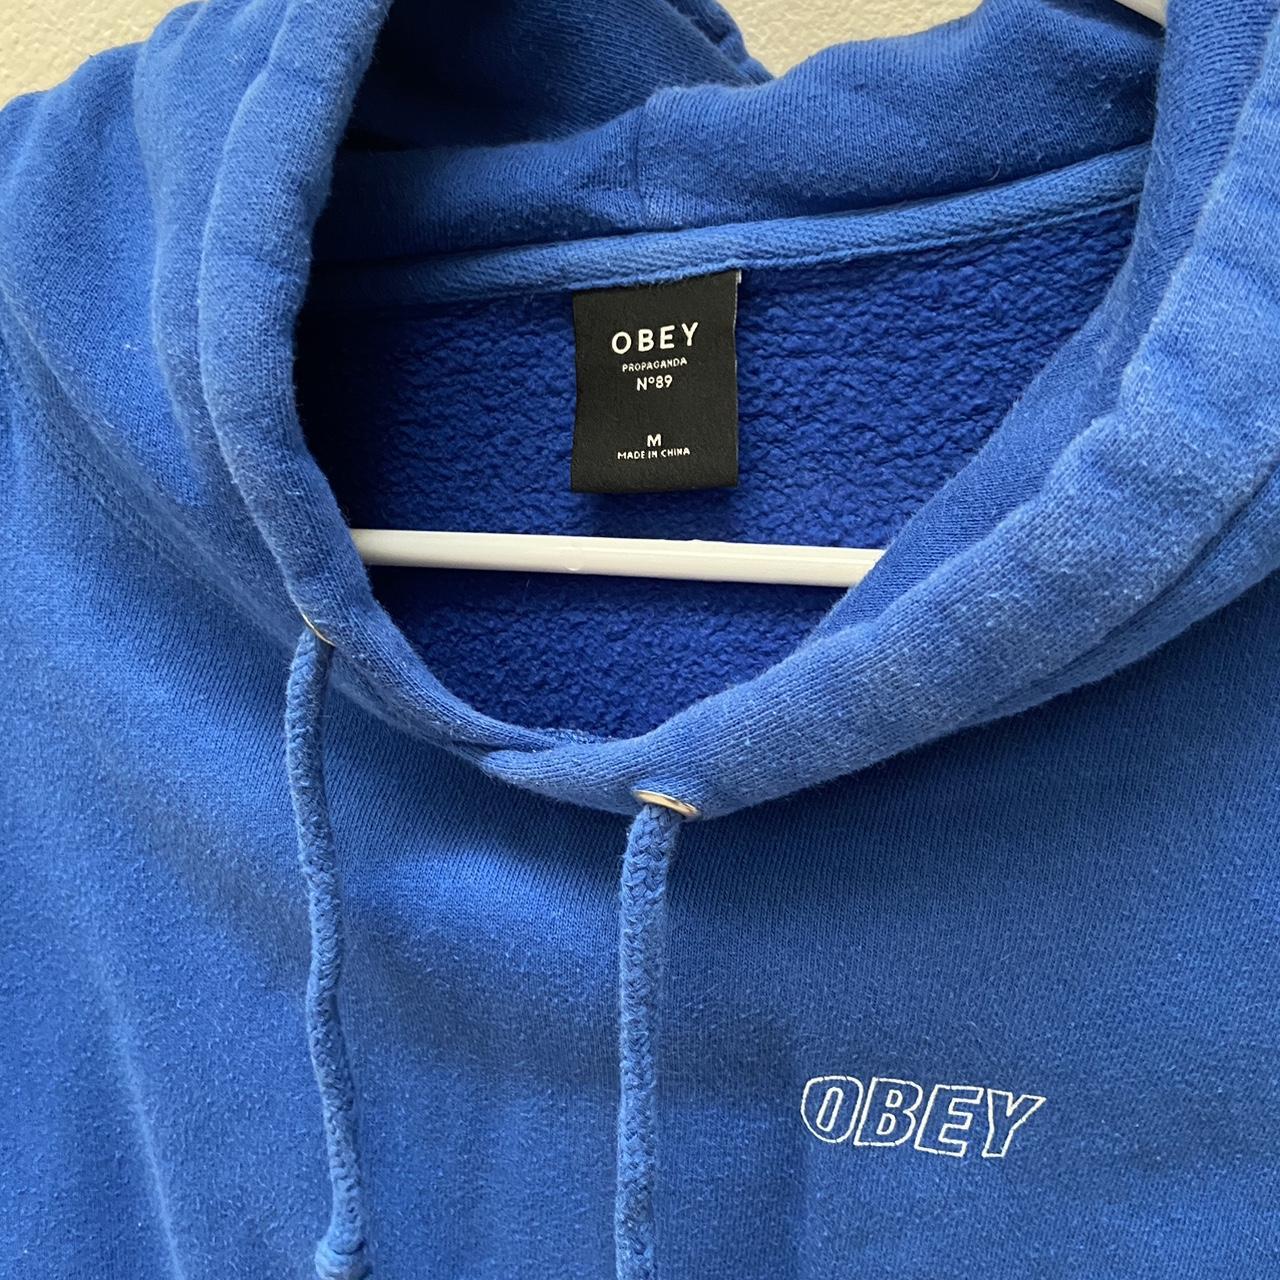 Obey Women's White and Blue Hoodie